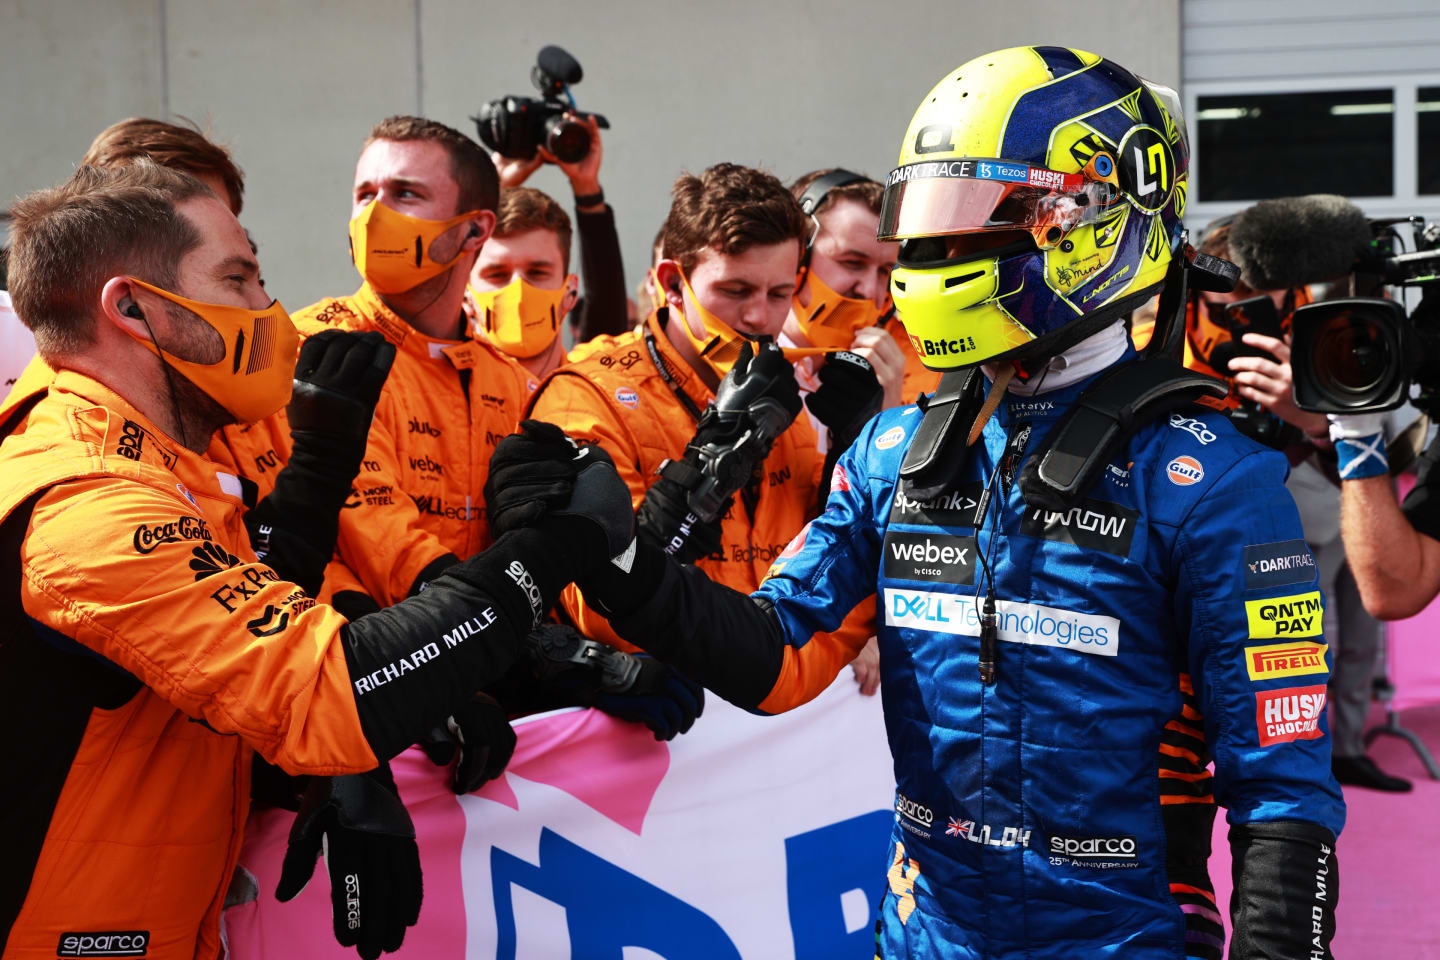 SPIELBERG, AUSTRIA - JULY 04: Third placed Lando Norris of Great Britain and McLaren F1 celebrates in parc ferme during the F1 Grand Prix of Austria at Red Bull Ring on July 04, 2021 in Spielberg, Austria. (Photo by Mark Thompson/Getty Images)